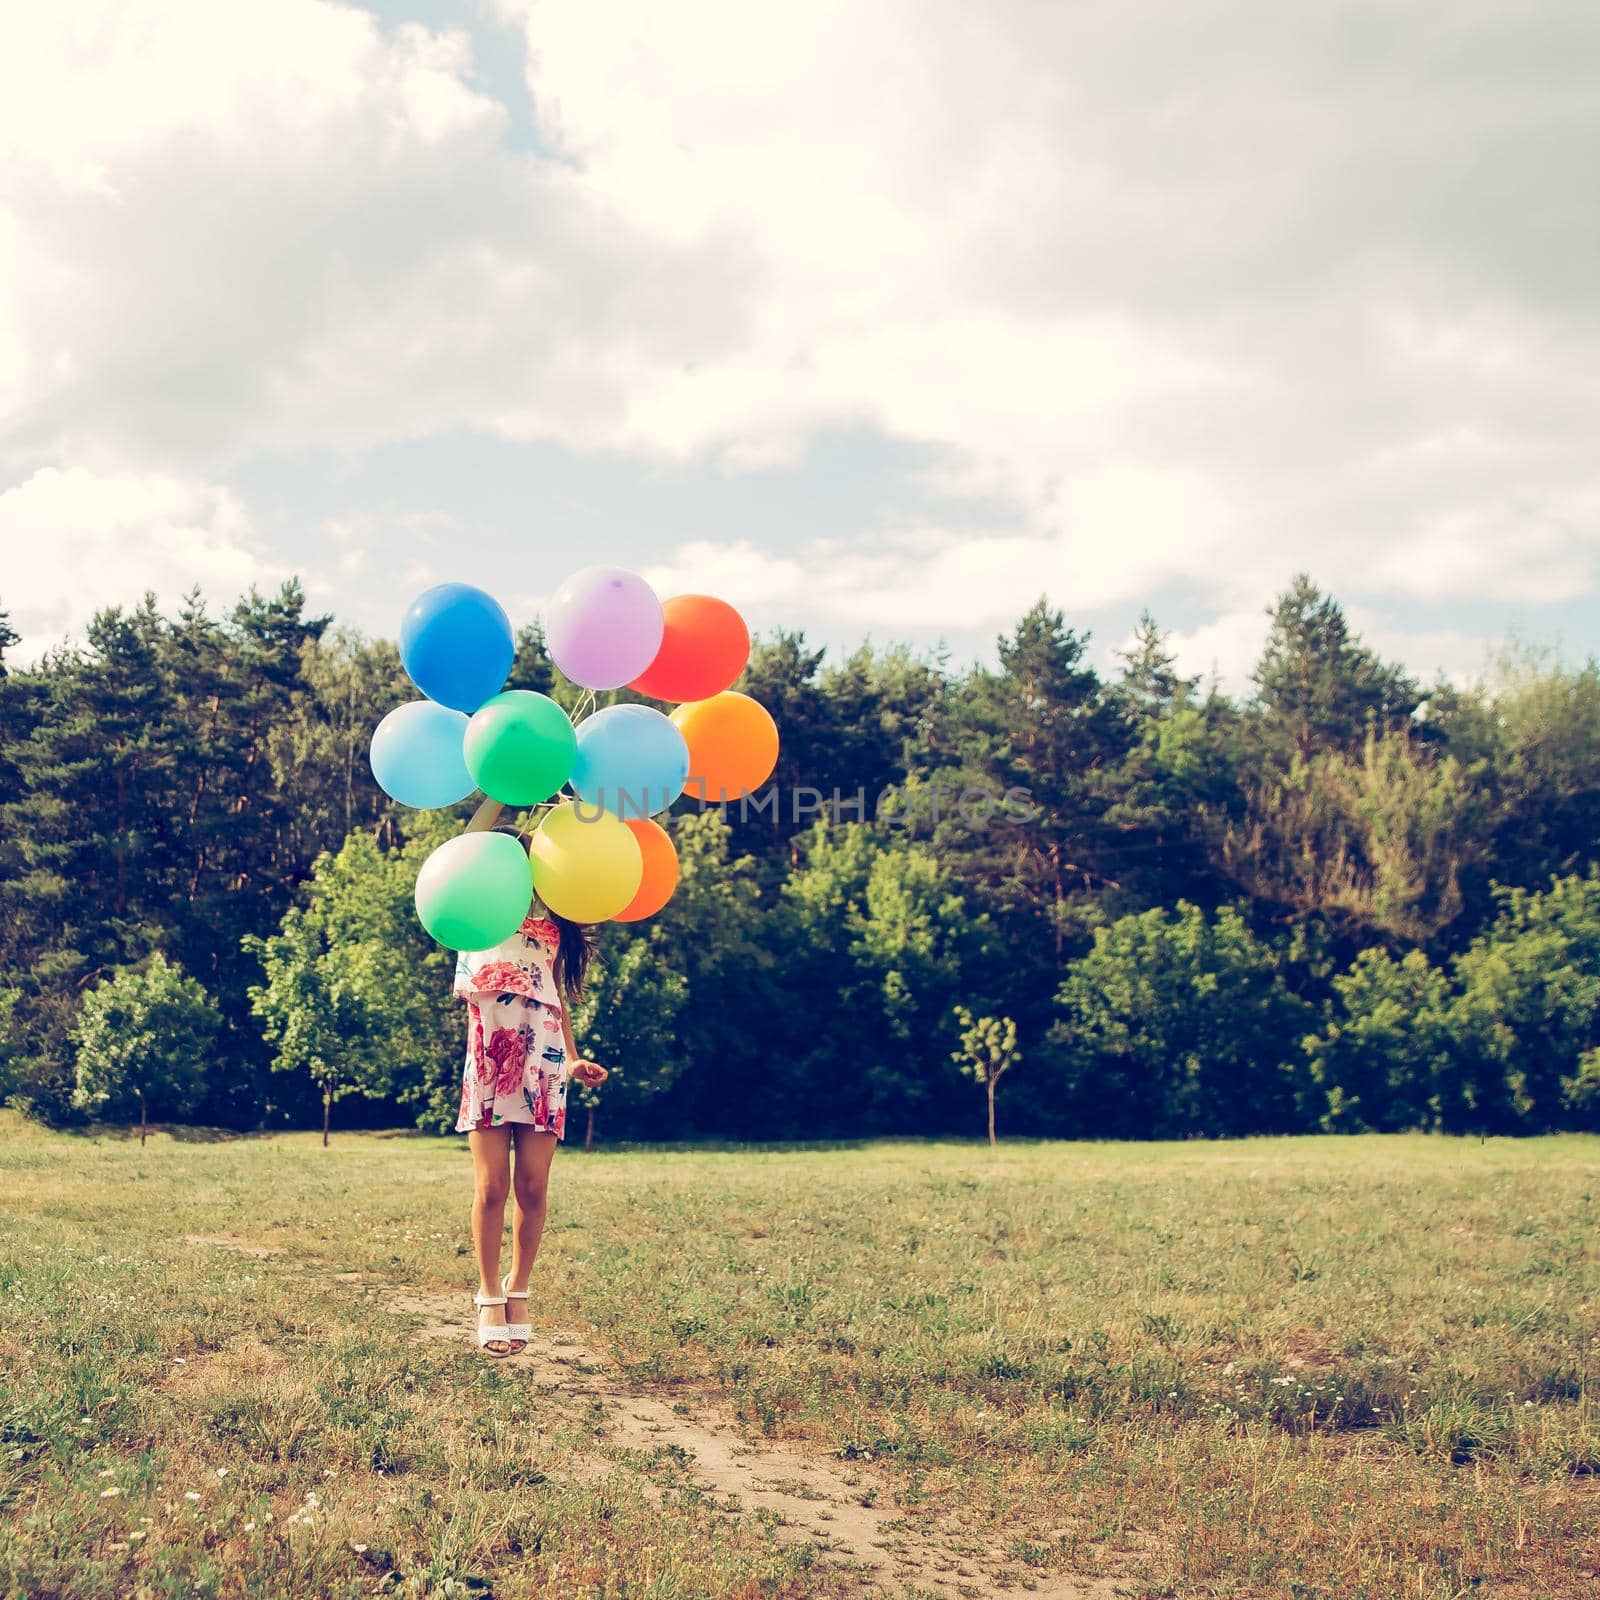 colorful balloons in the hands of a little girl. by SmartPhotoLab